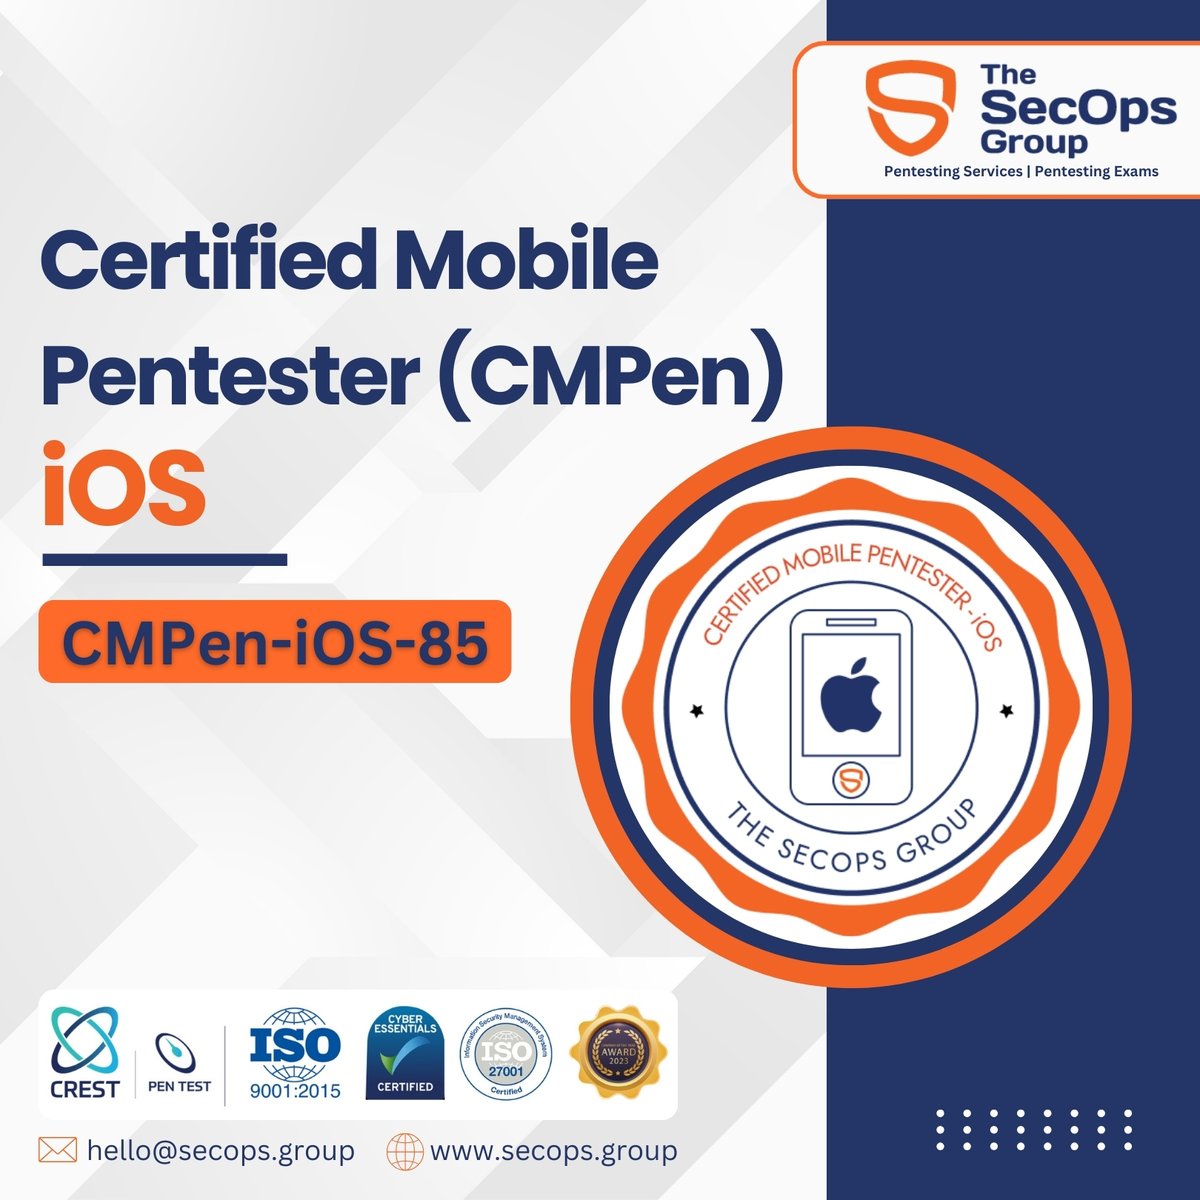 After the phenomenal response to our Android exam, we're excited to announce our offer on the Certified Mobile Pentester (CMPen) - iOS exam!

*** Like and Reshare for a Chance to Win Big! ***
3 lucky winners will receive the CMPen-iOS exam for FREE!

Get 85% Discount on our iOS…